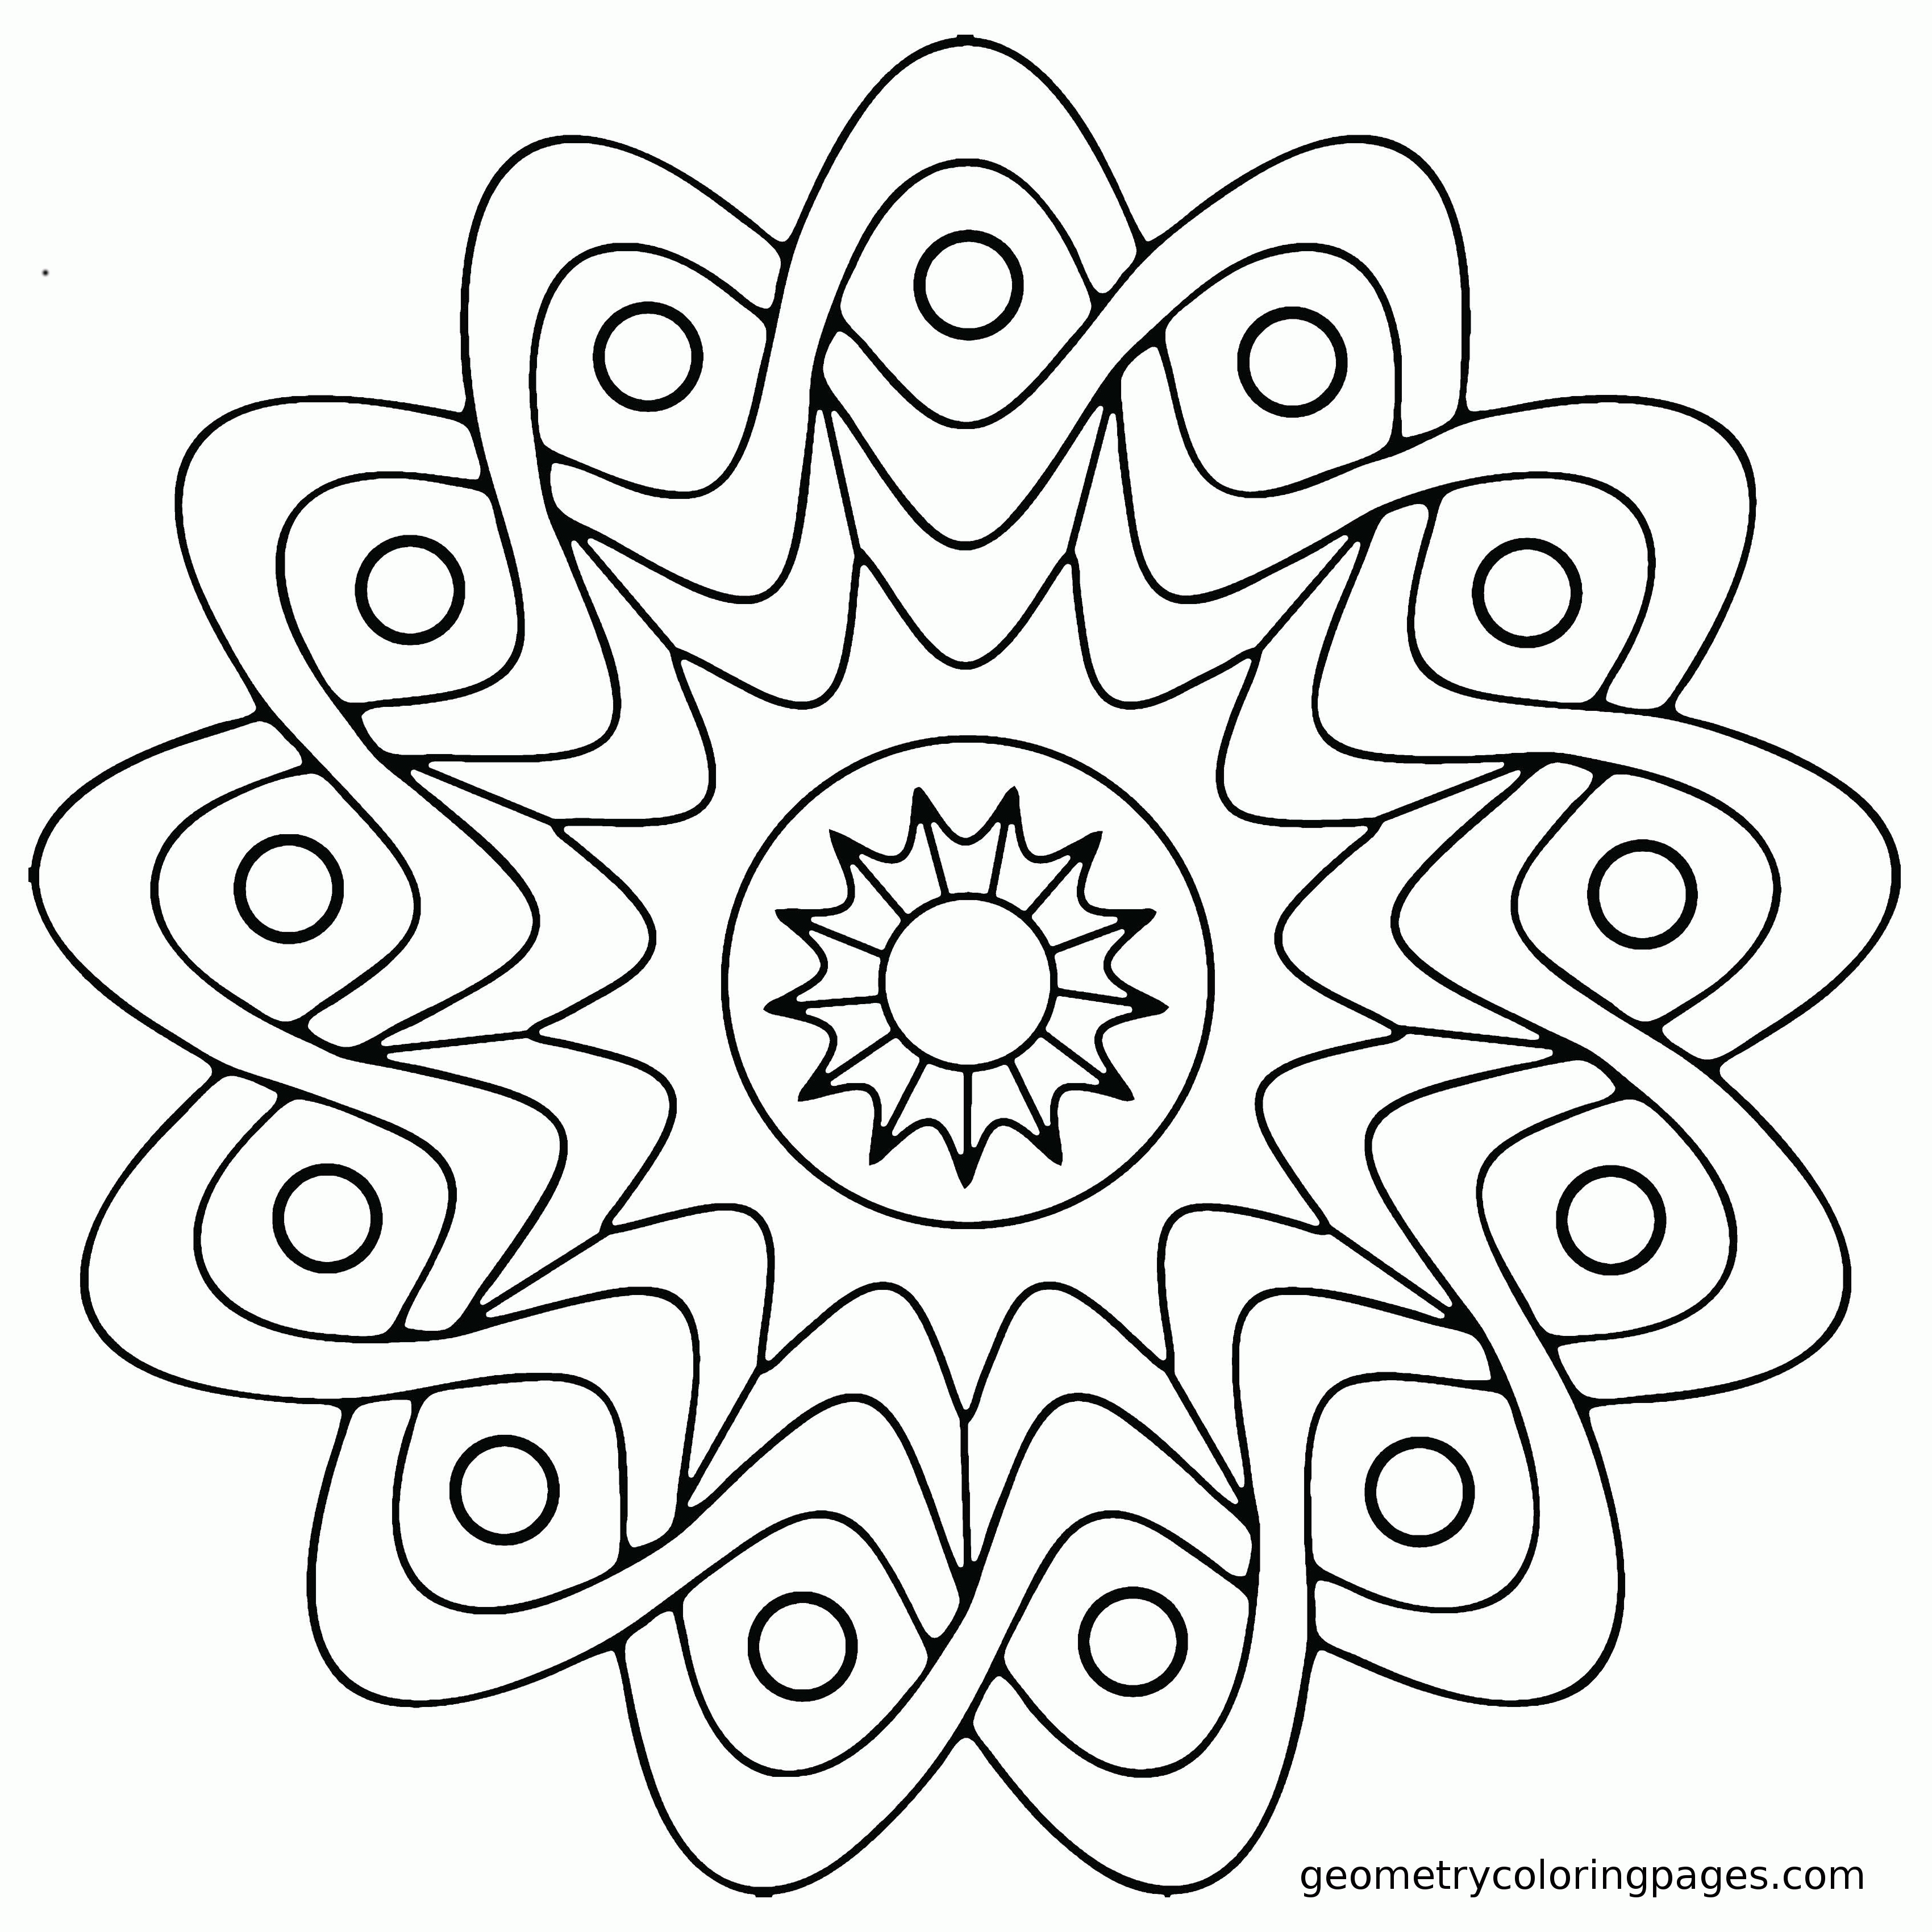 easy-coloring-pages-for-boys-frog-simple-mandala-coloring-pages-coloring-home